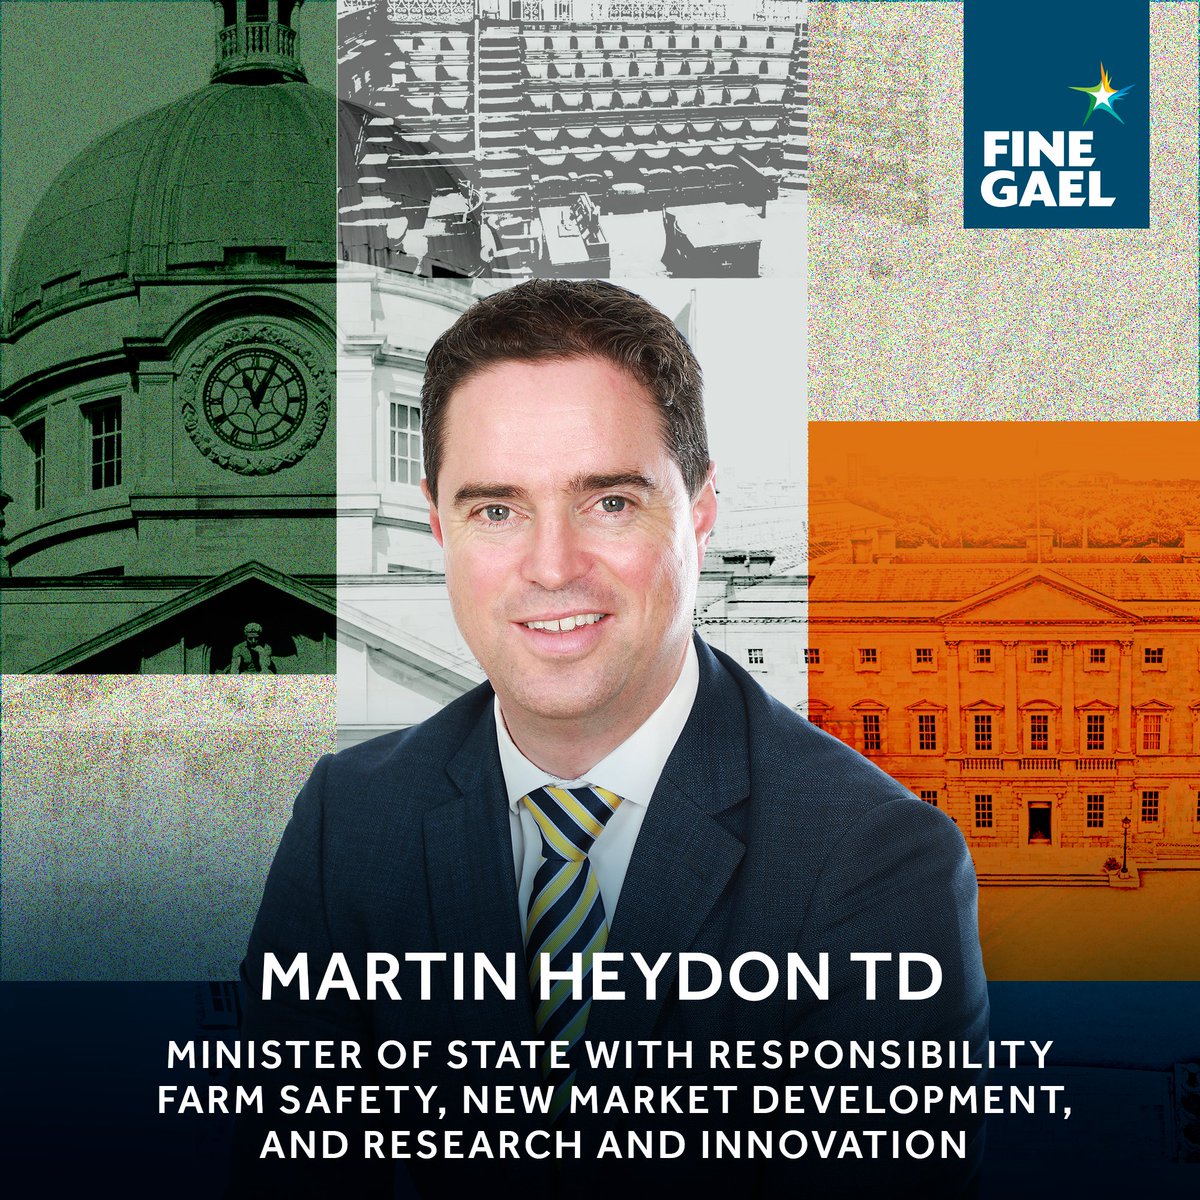 .@martinheydonfg has been reappointed as Minister of State with responsibility for Farm Safety, New Market Development, and Research and Innovation.